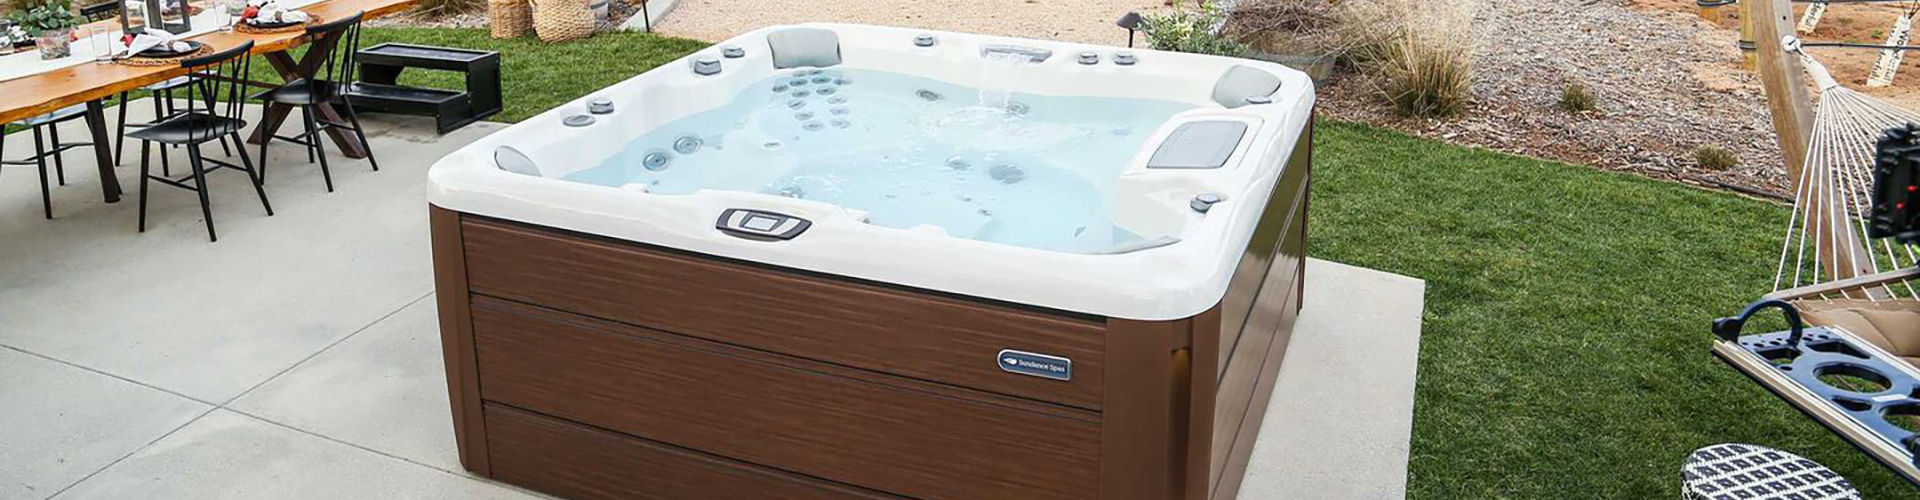 Give Your New Hot Tub A Solid Foundation